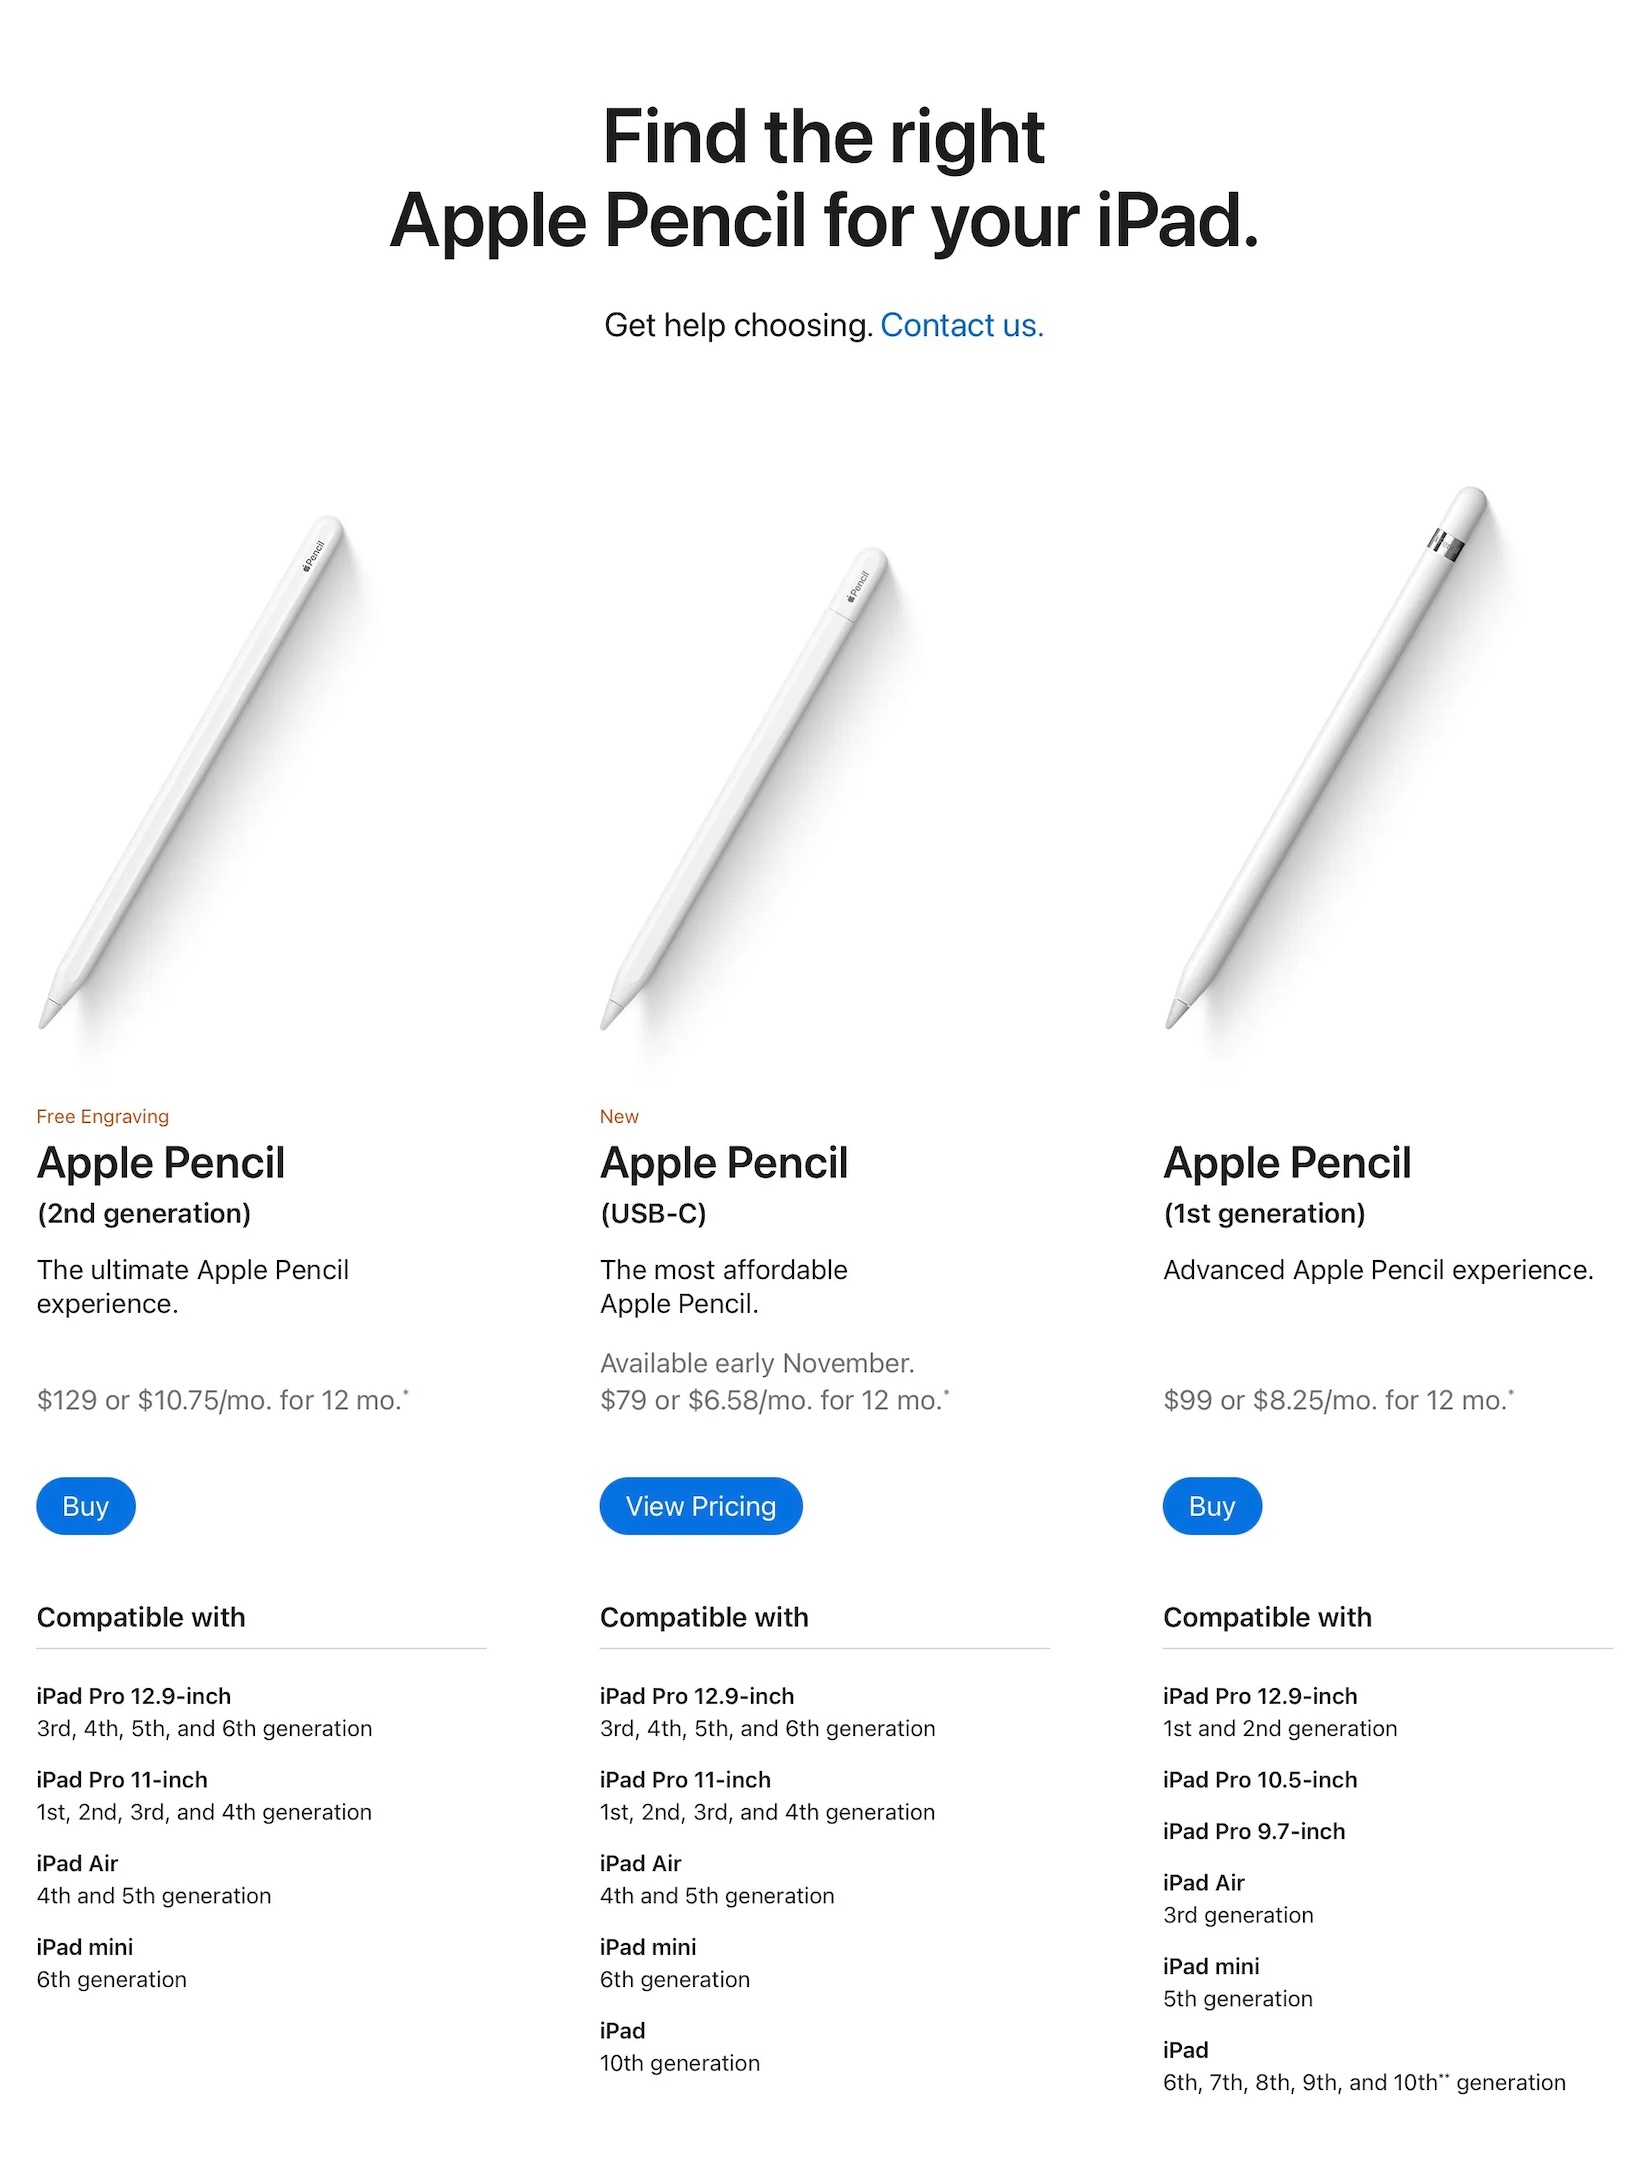 Apple Launches New $79 Apple Pencil with USB-C - AppleMagazine